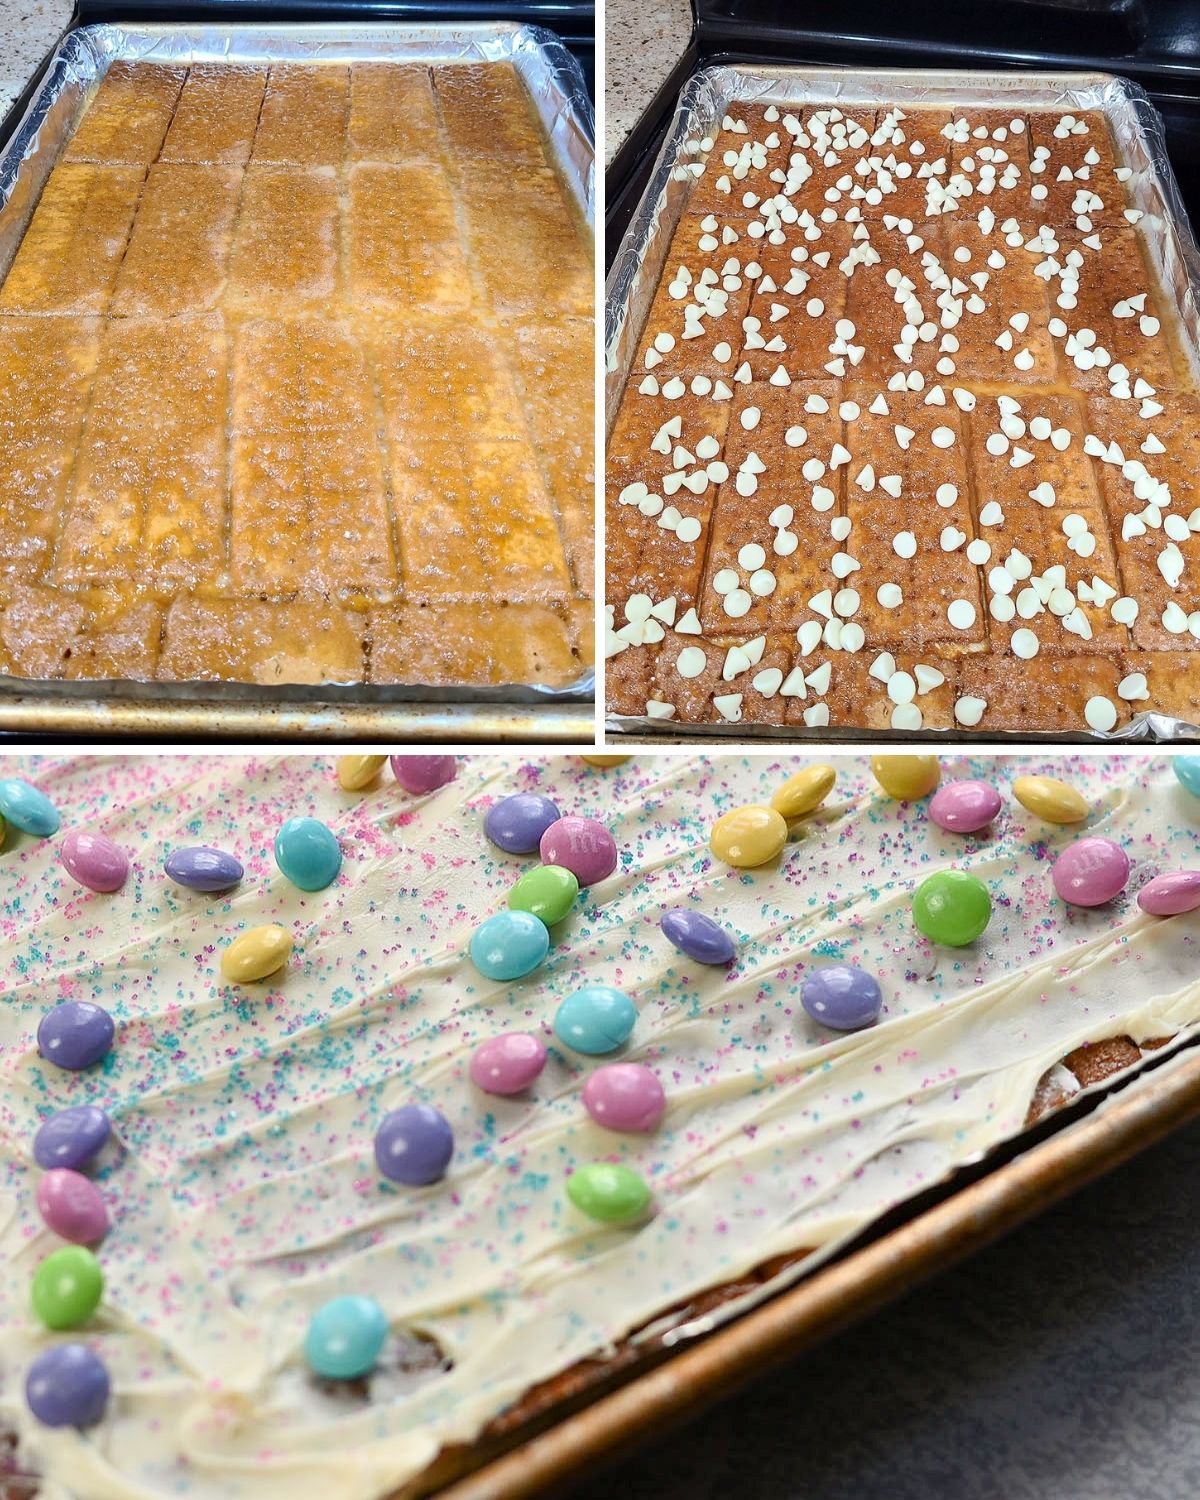 A collage of photos showing the process of making graham cracker crunch.